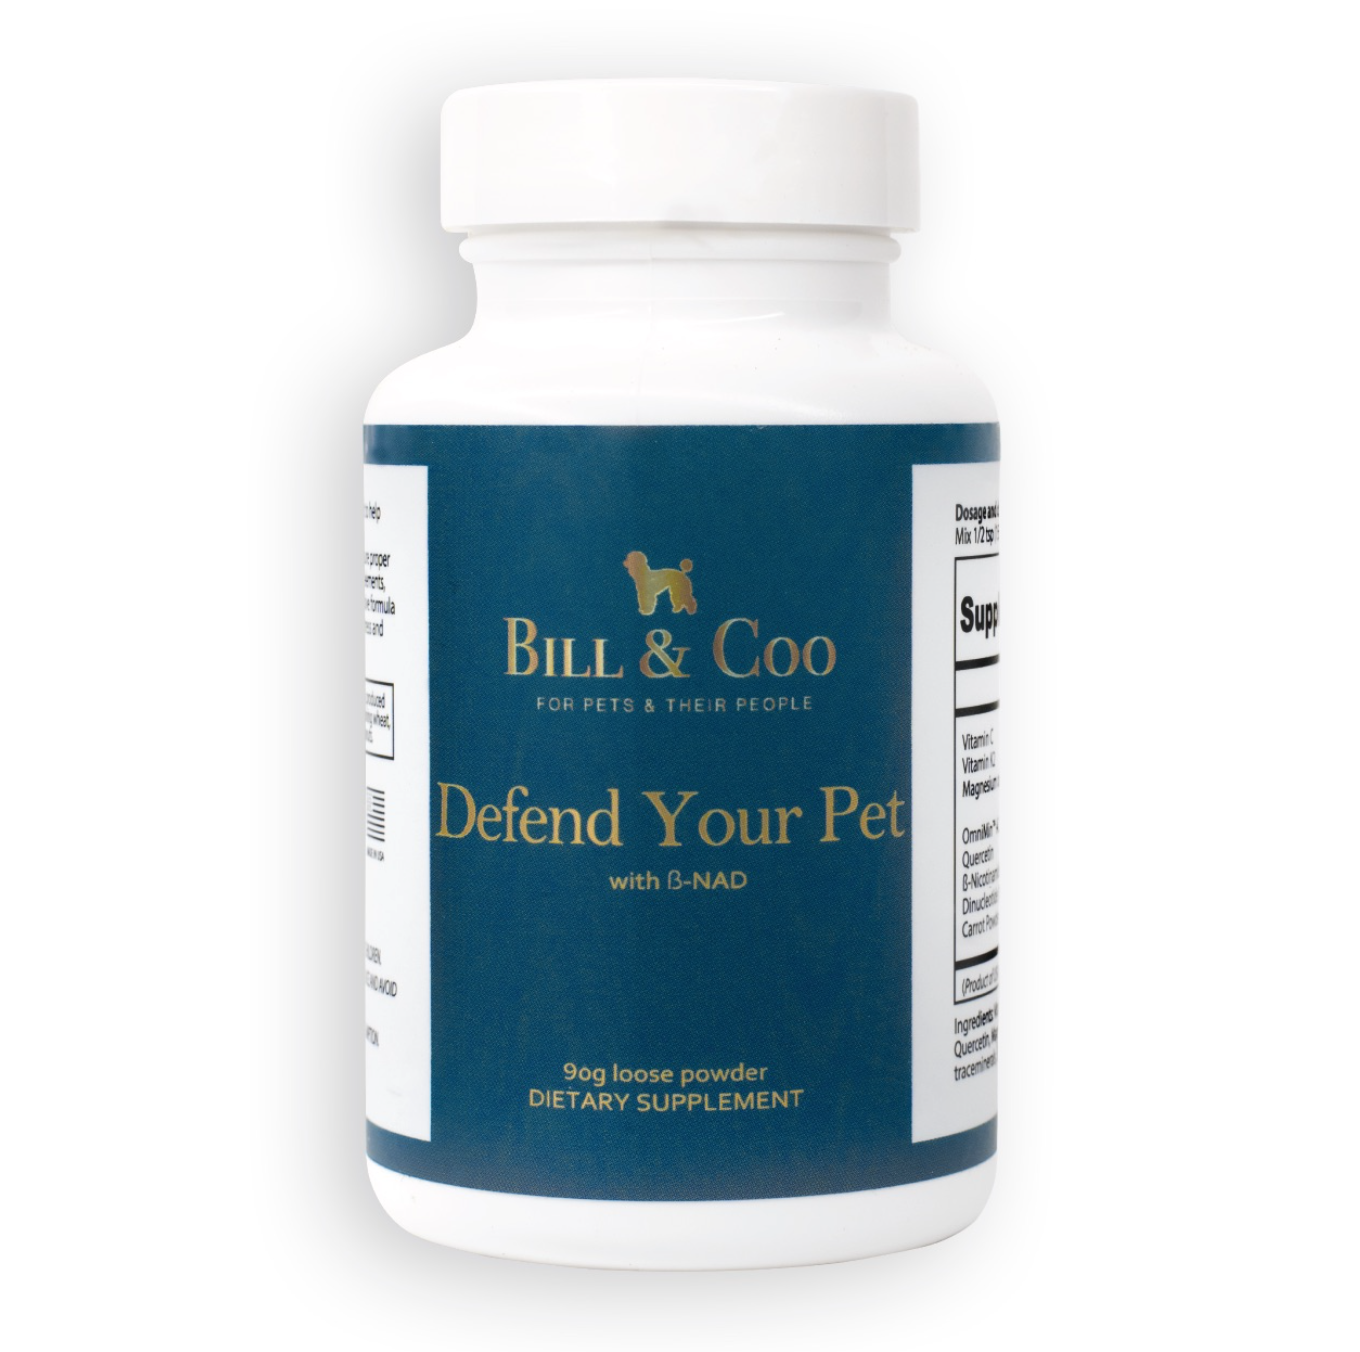 Bill & Coo by ROOT - Defend Your Pet